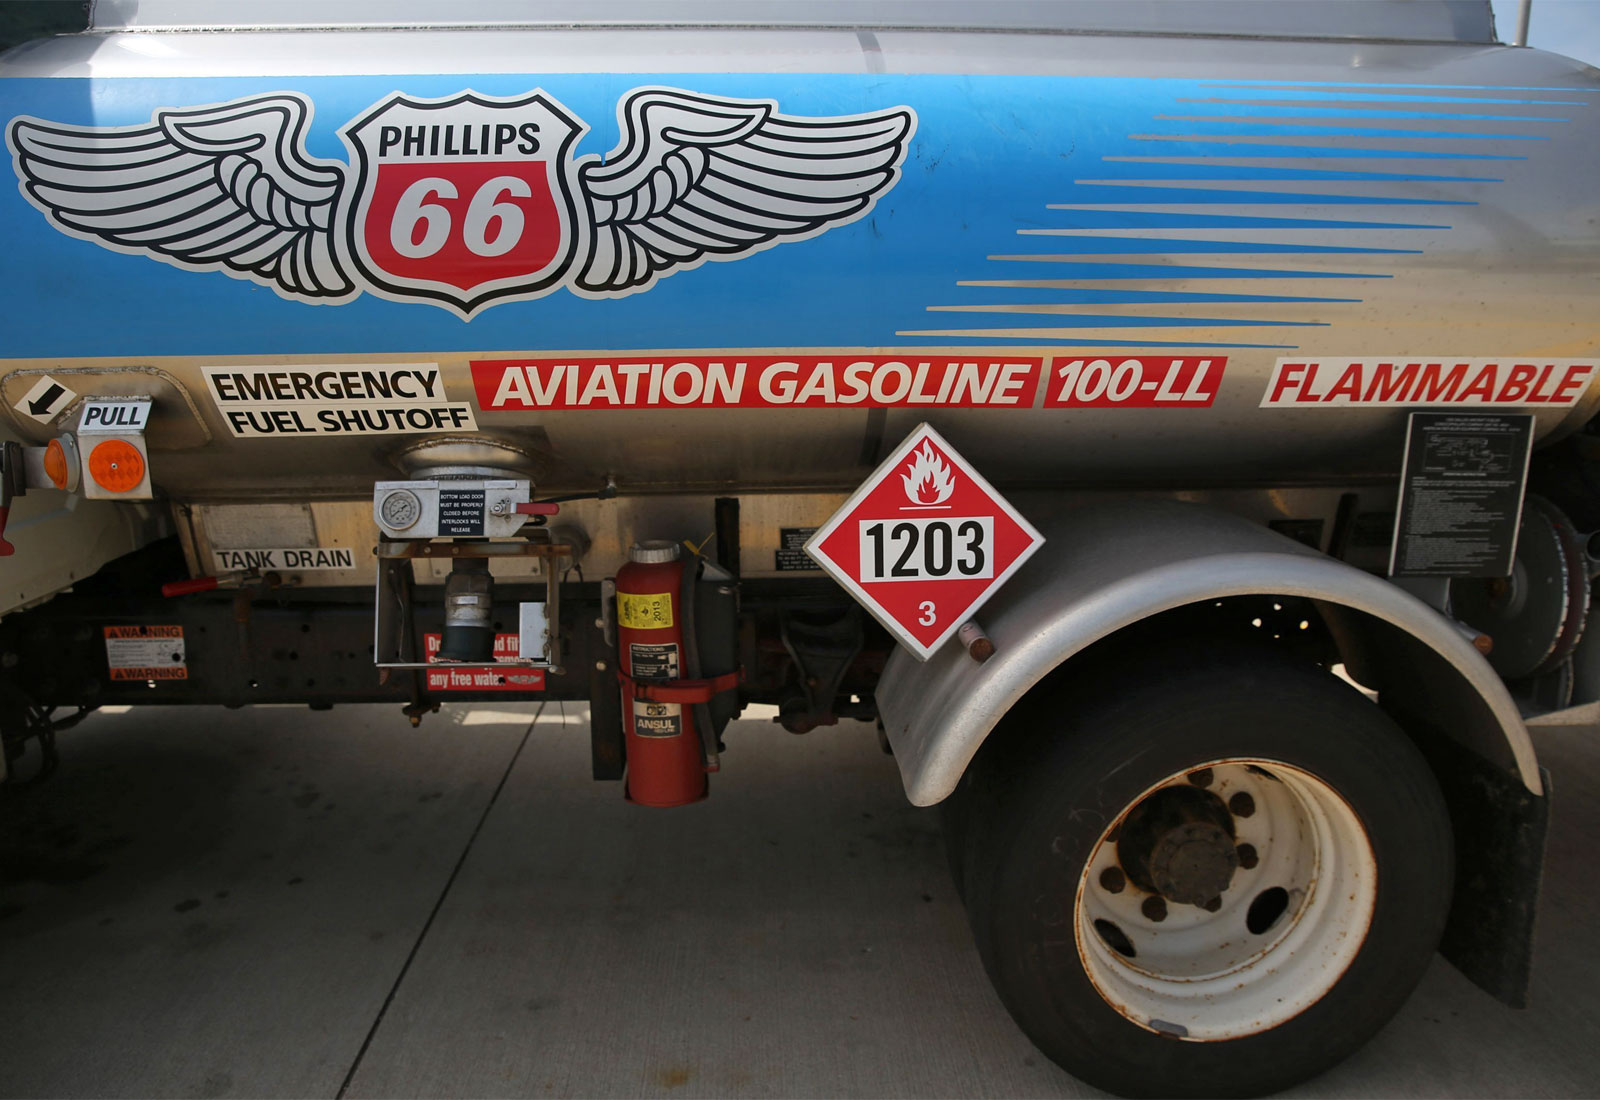 Tank of leaded aviation gasoline with Phillips 66 logo